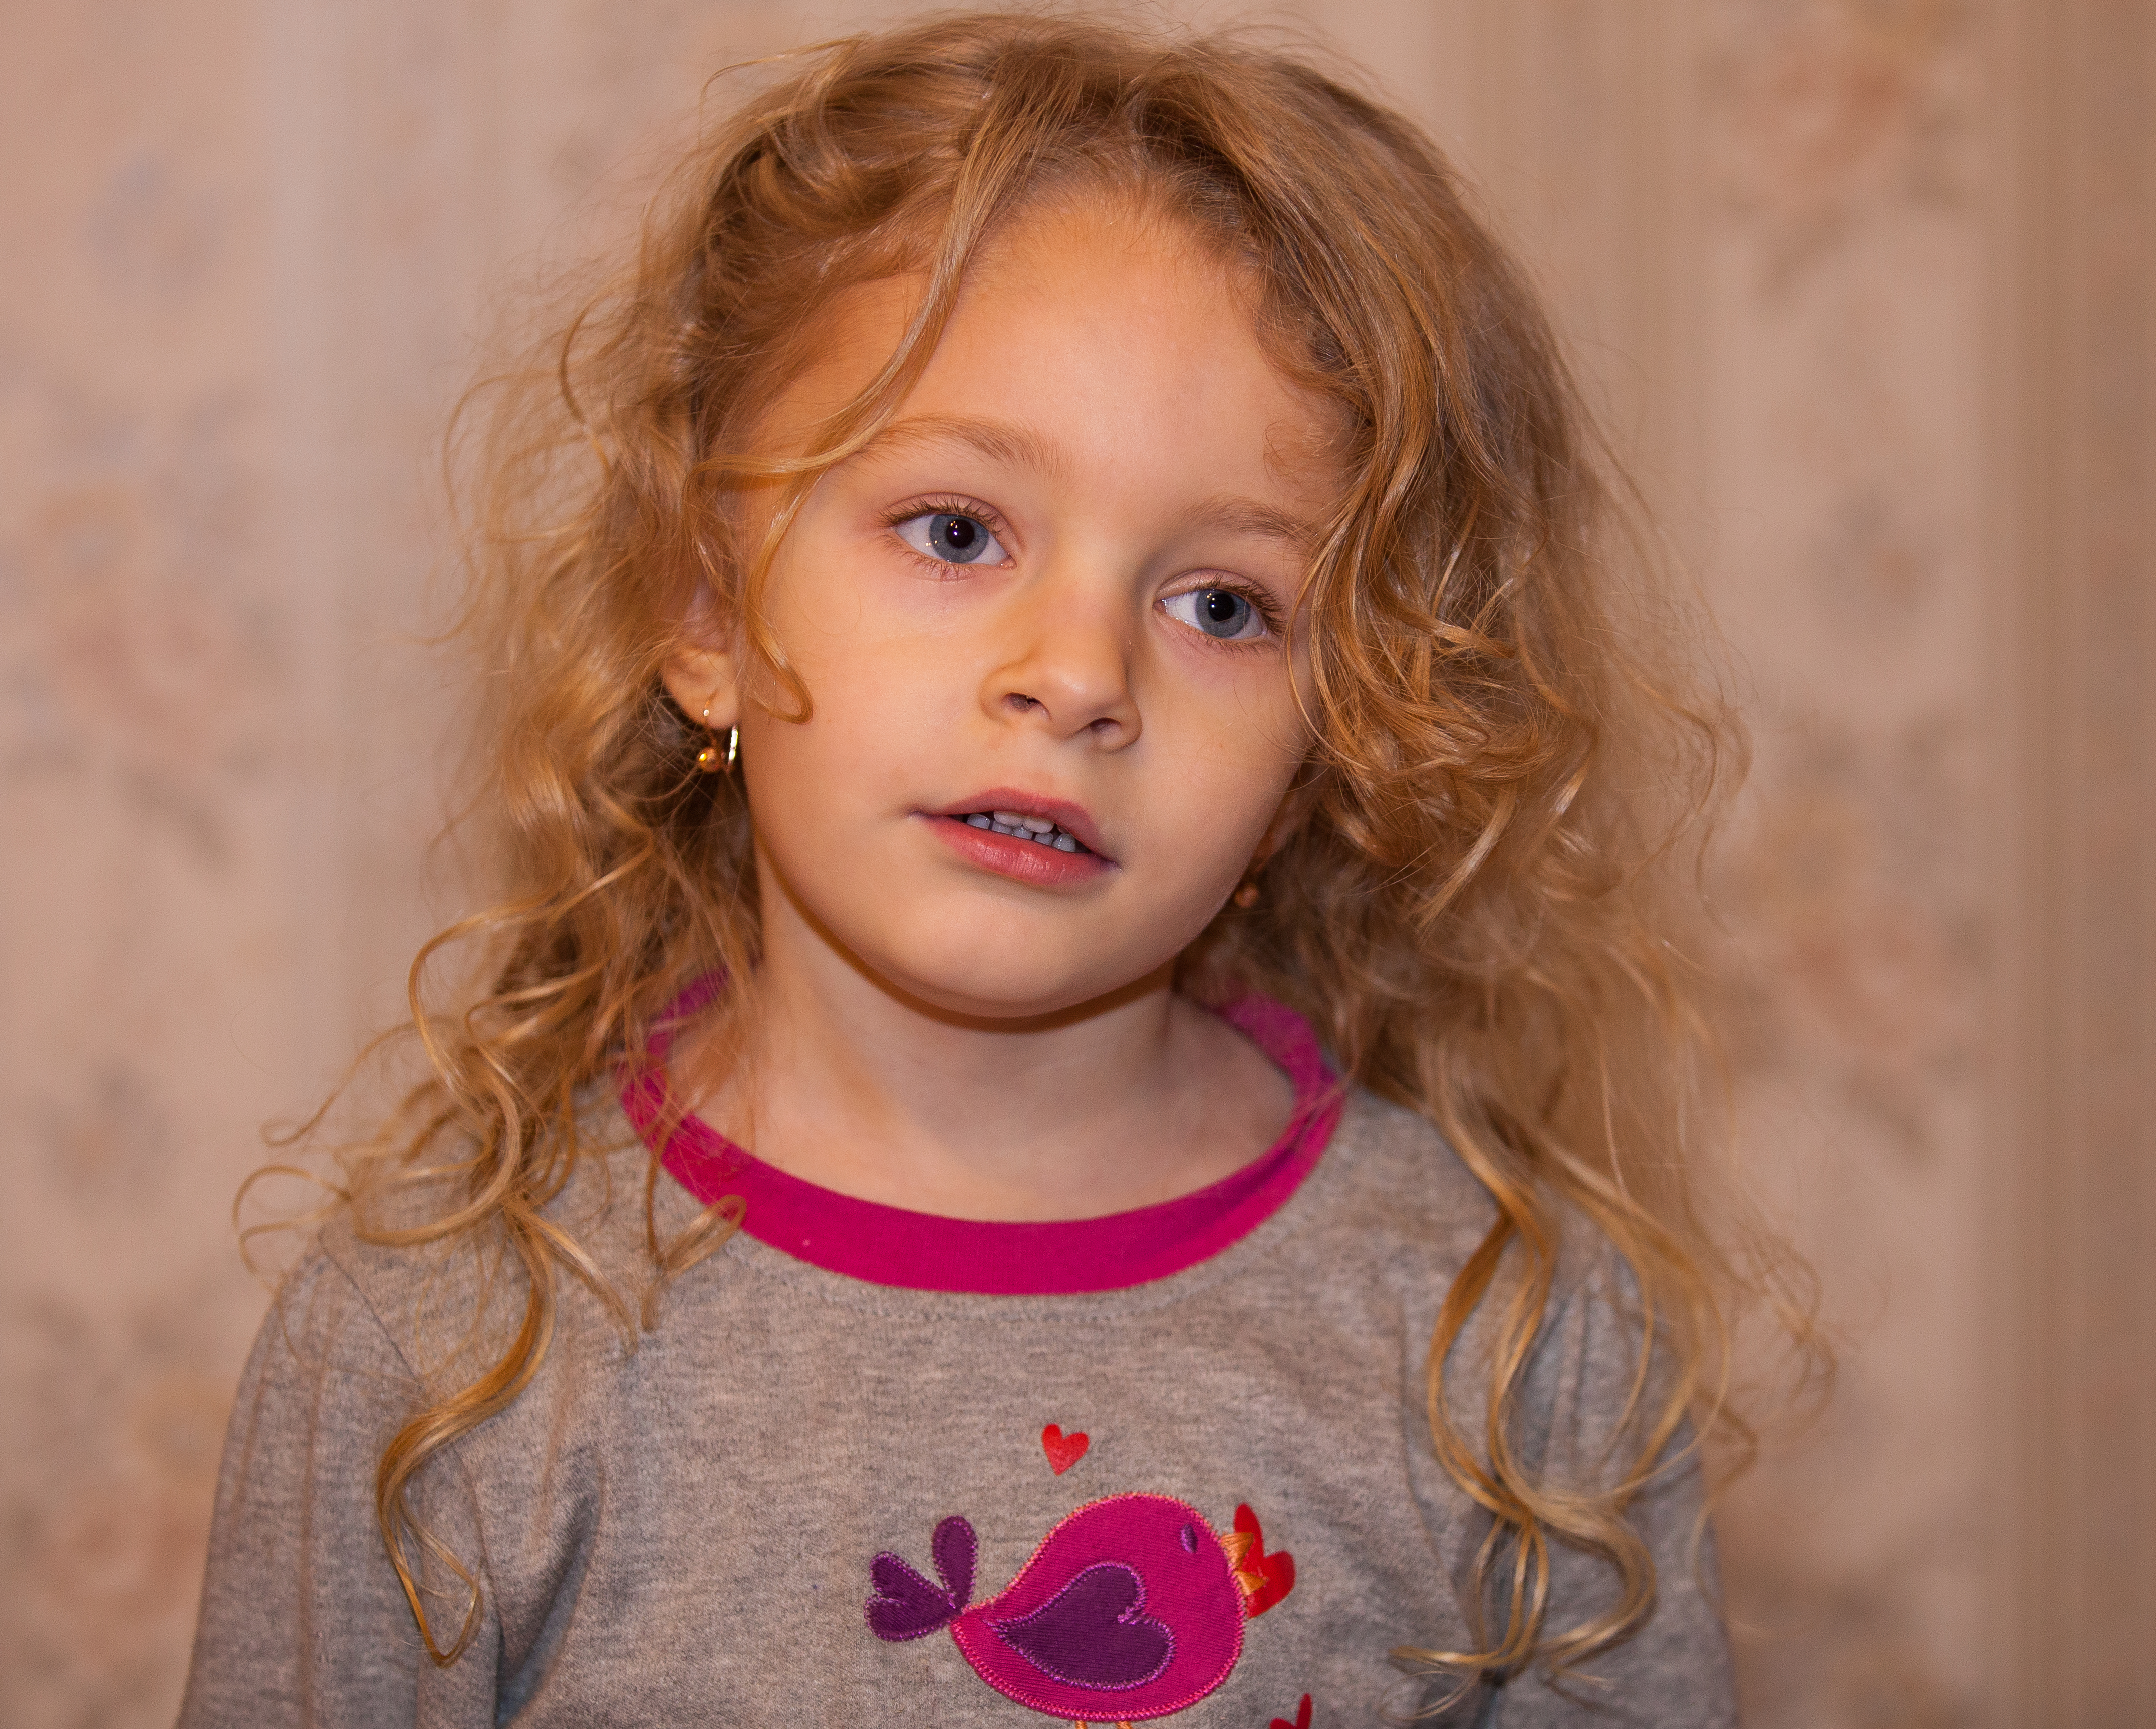 a cute blond child girl photographed in January 2014, photo 2 out of 4